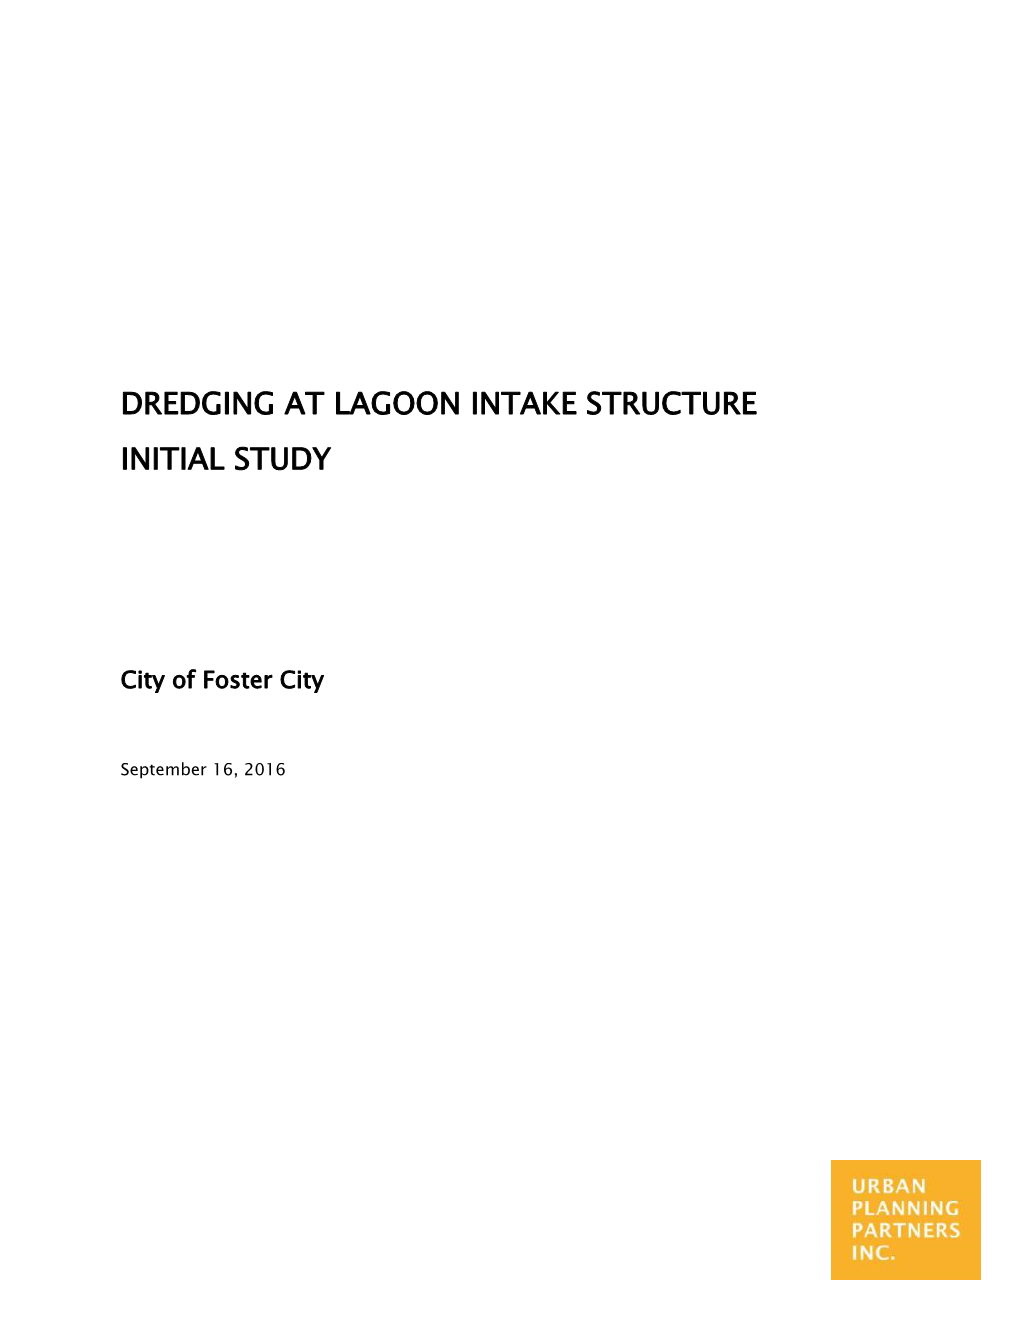 Dredging at Lagoon Intake Structure Initial Study